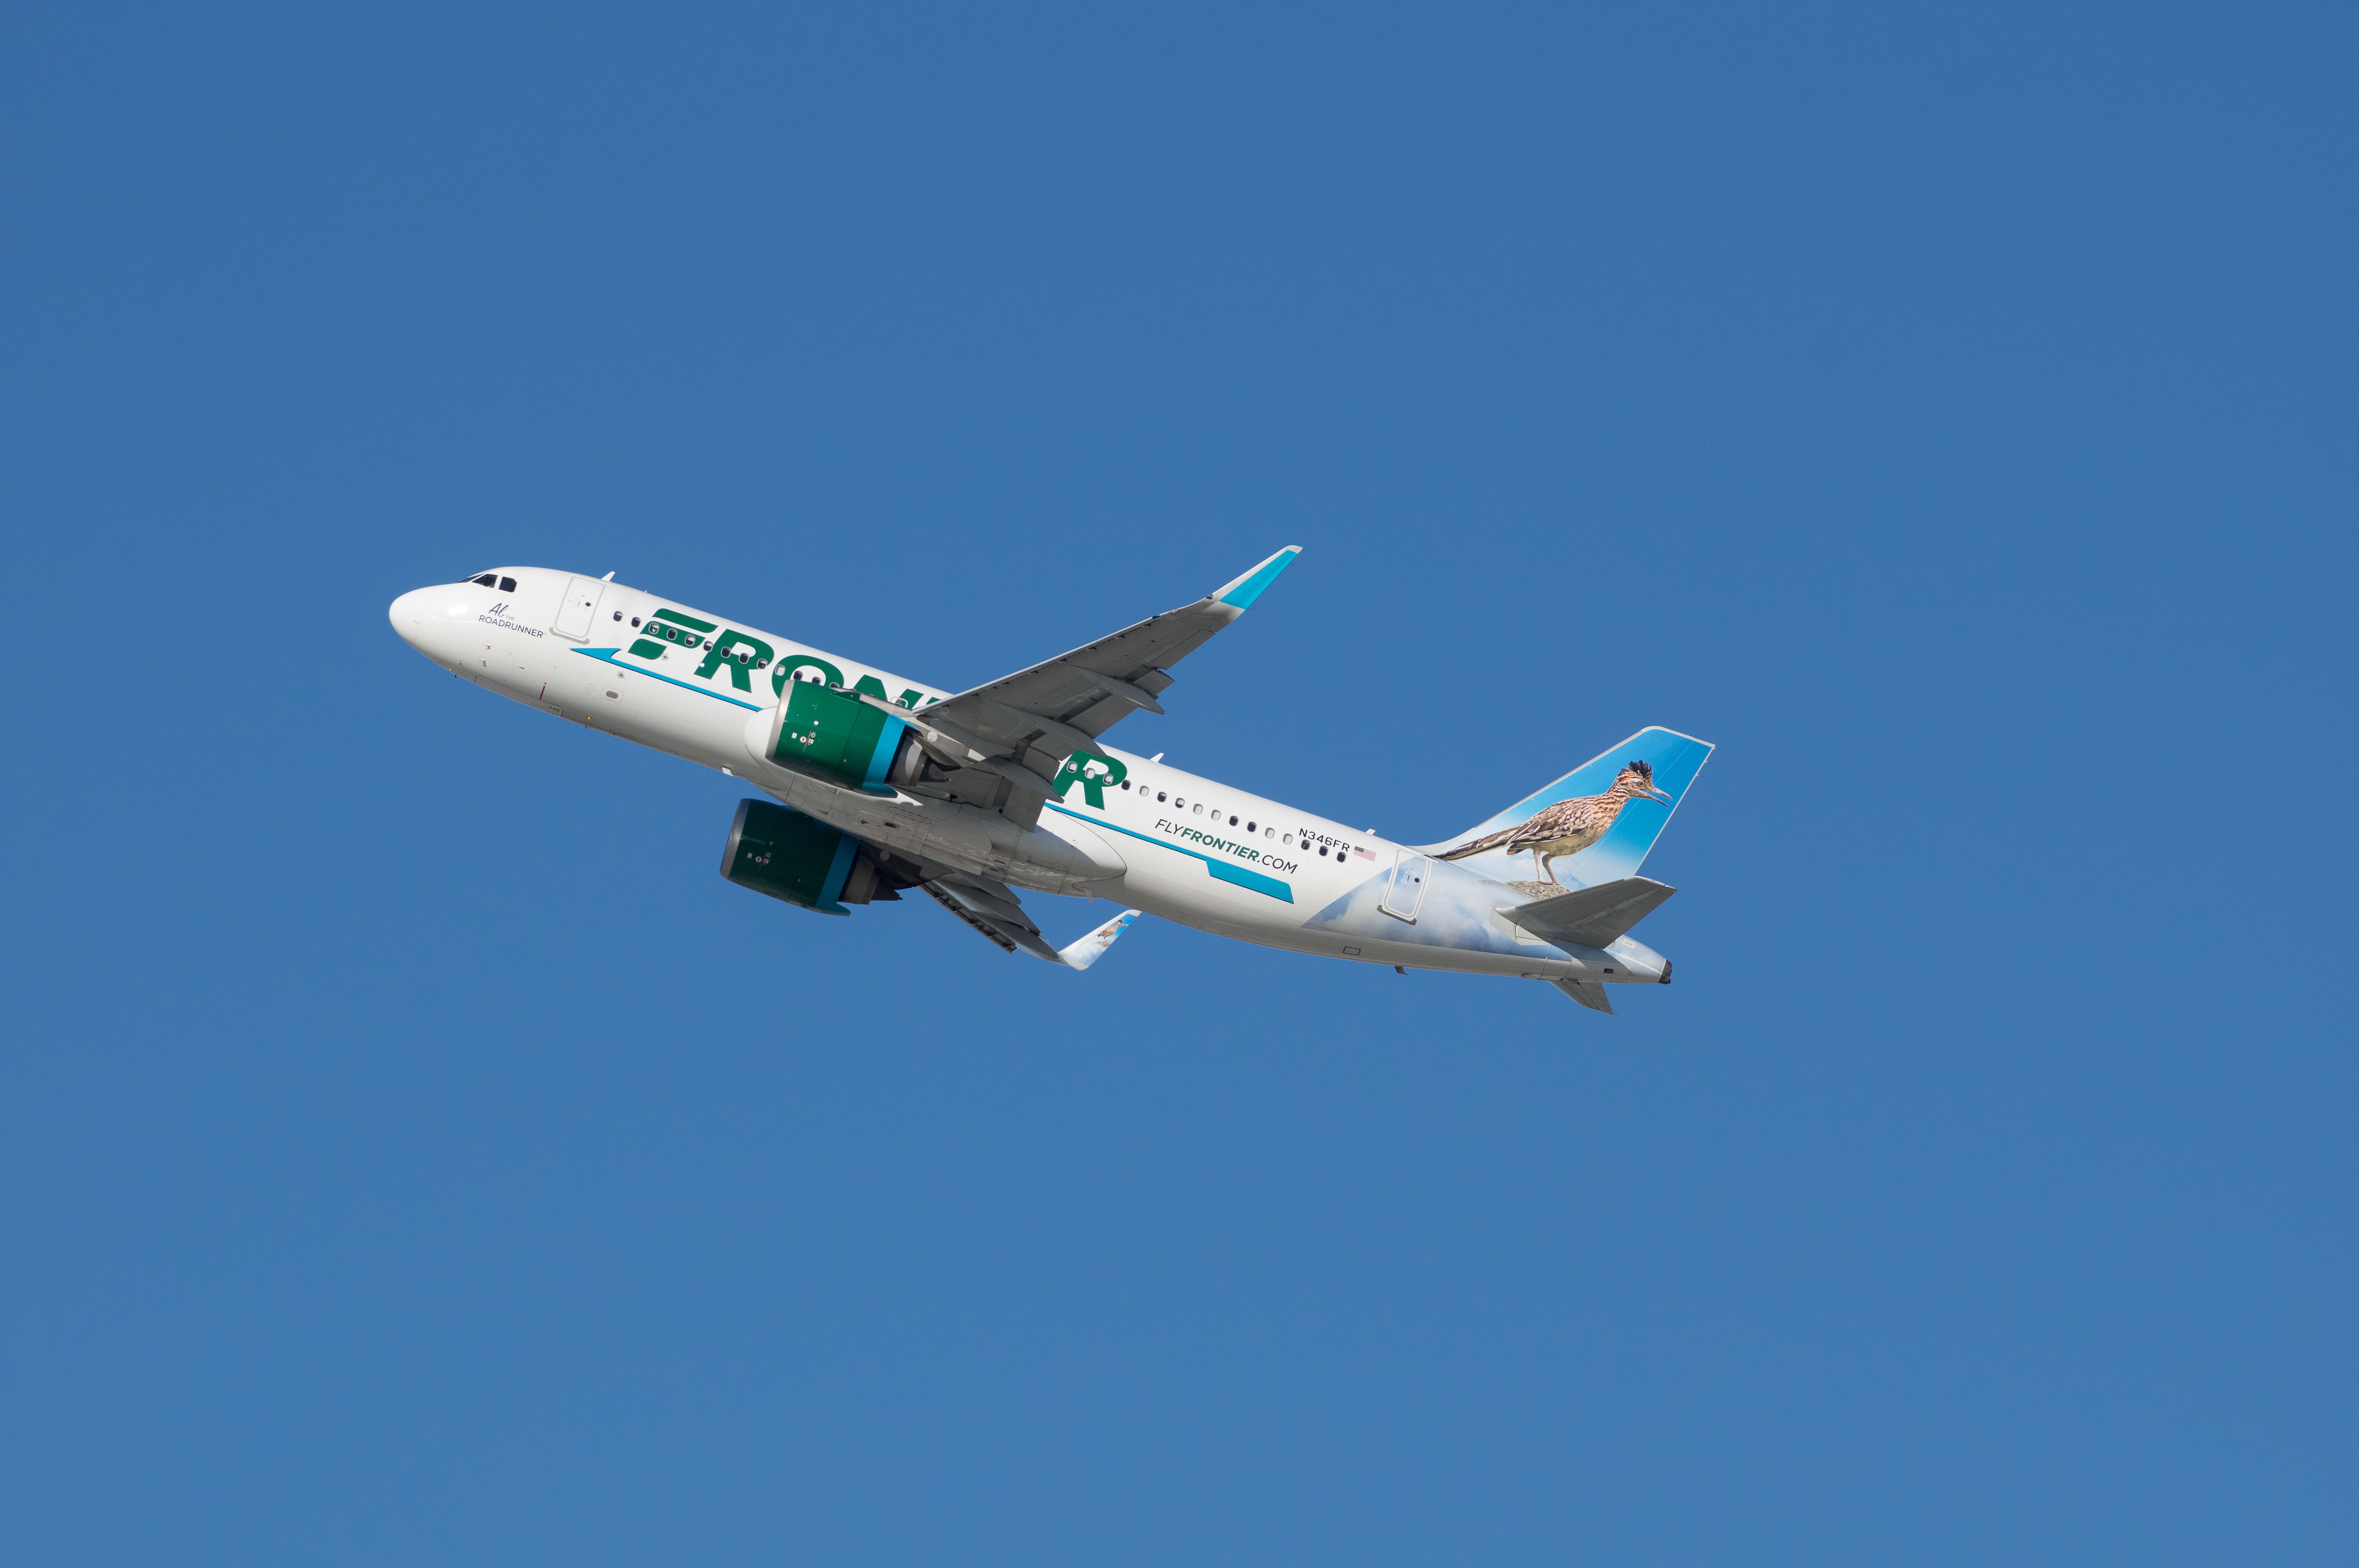 shutterstock_1893279976 - Los Angeles International Airport, California, USA - December 31, 2020: this image shows Frontier Airlines 'Al the Roadrunner' Airbus A320 airborne. Aircraft registration, N346FR.